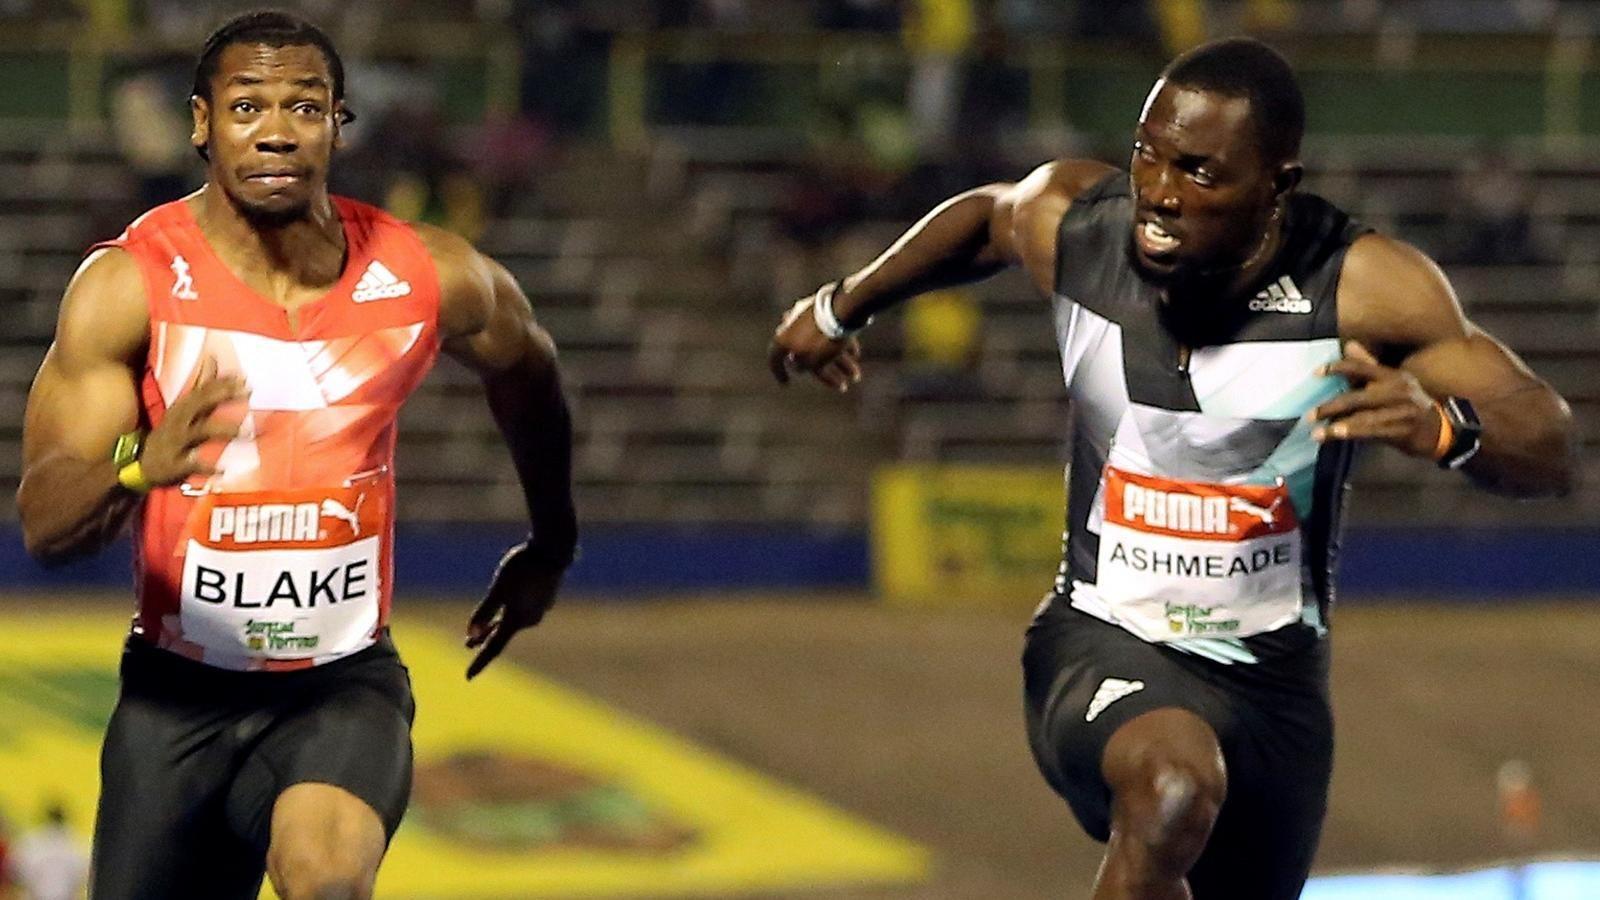 Yohan Blake completes Jamaican sprint double in Usain Bolt's absence